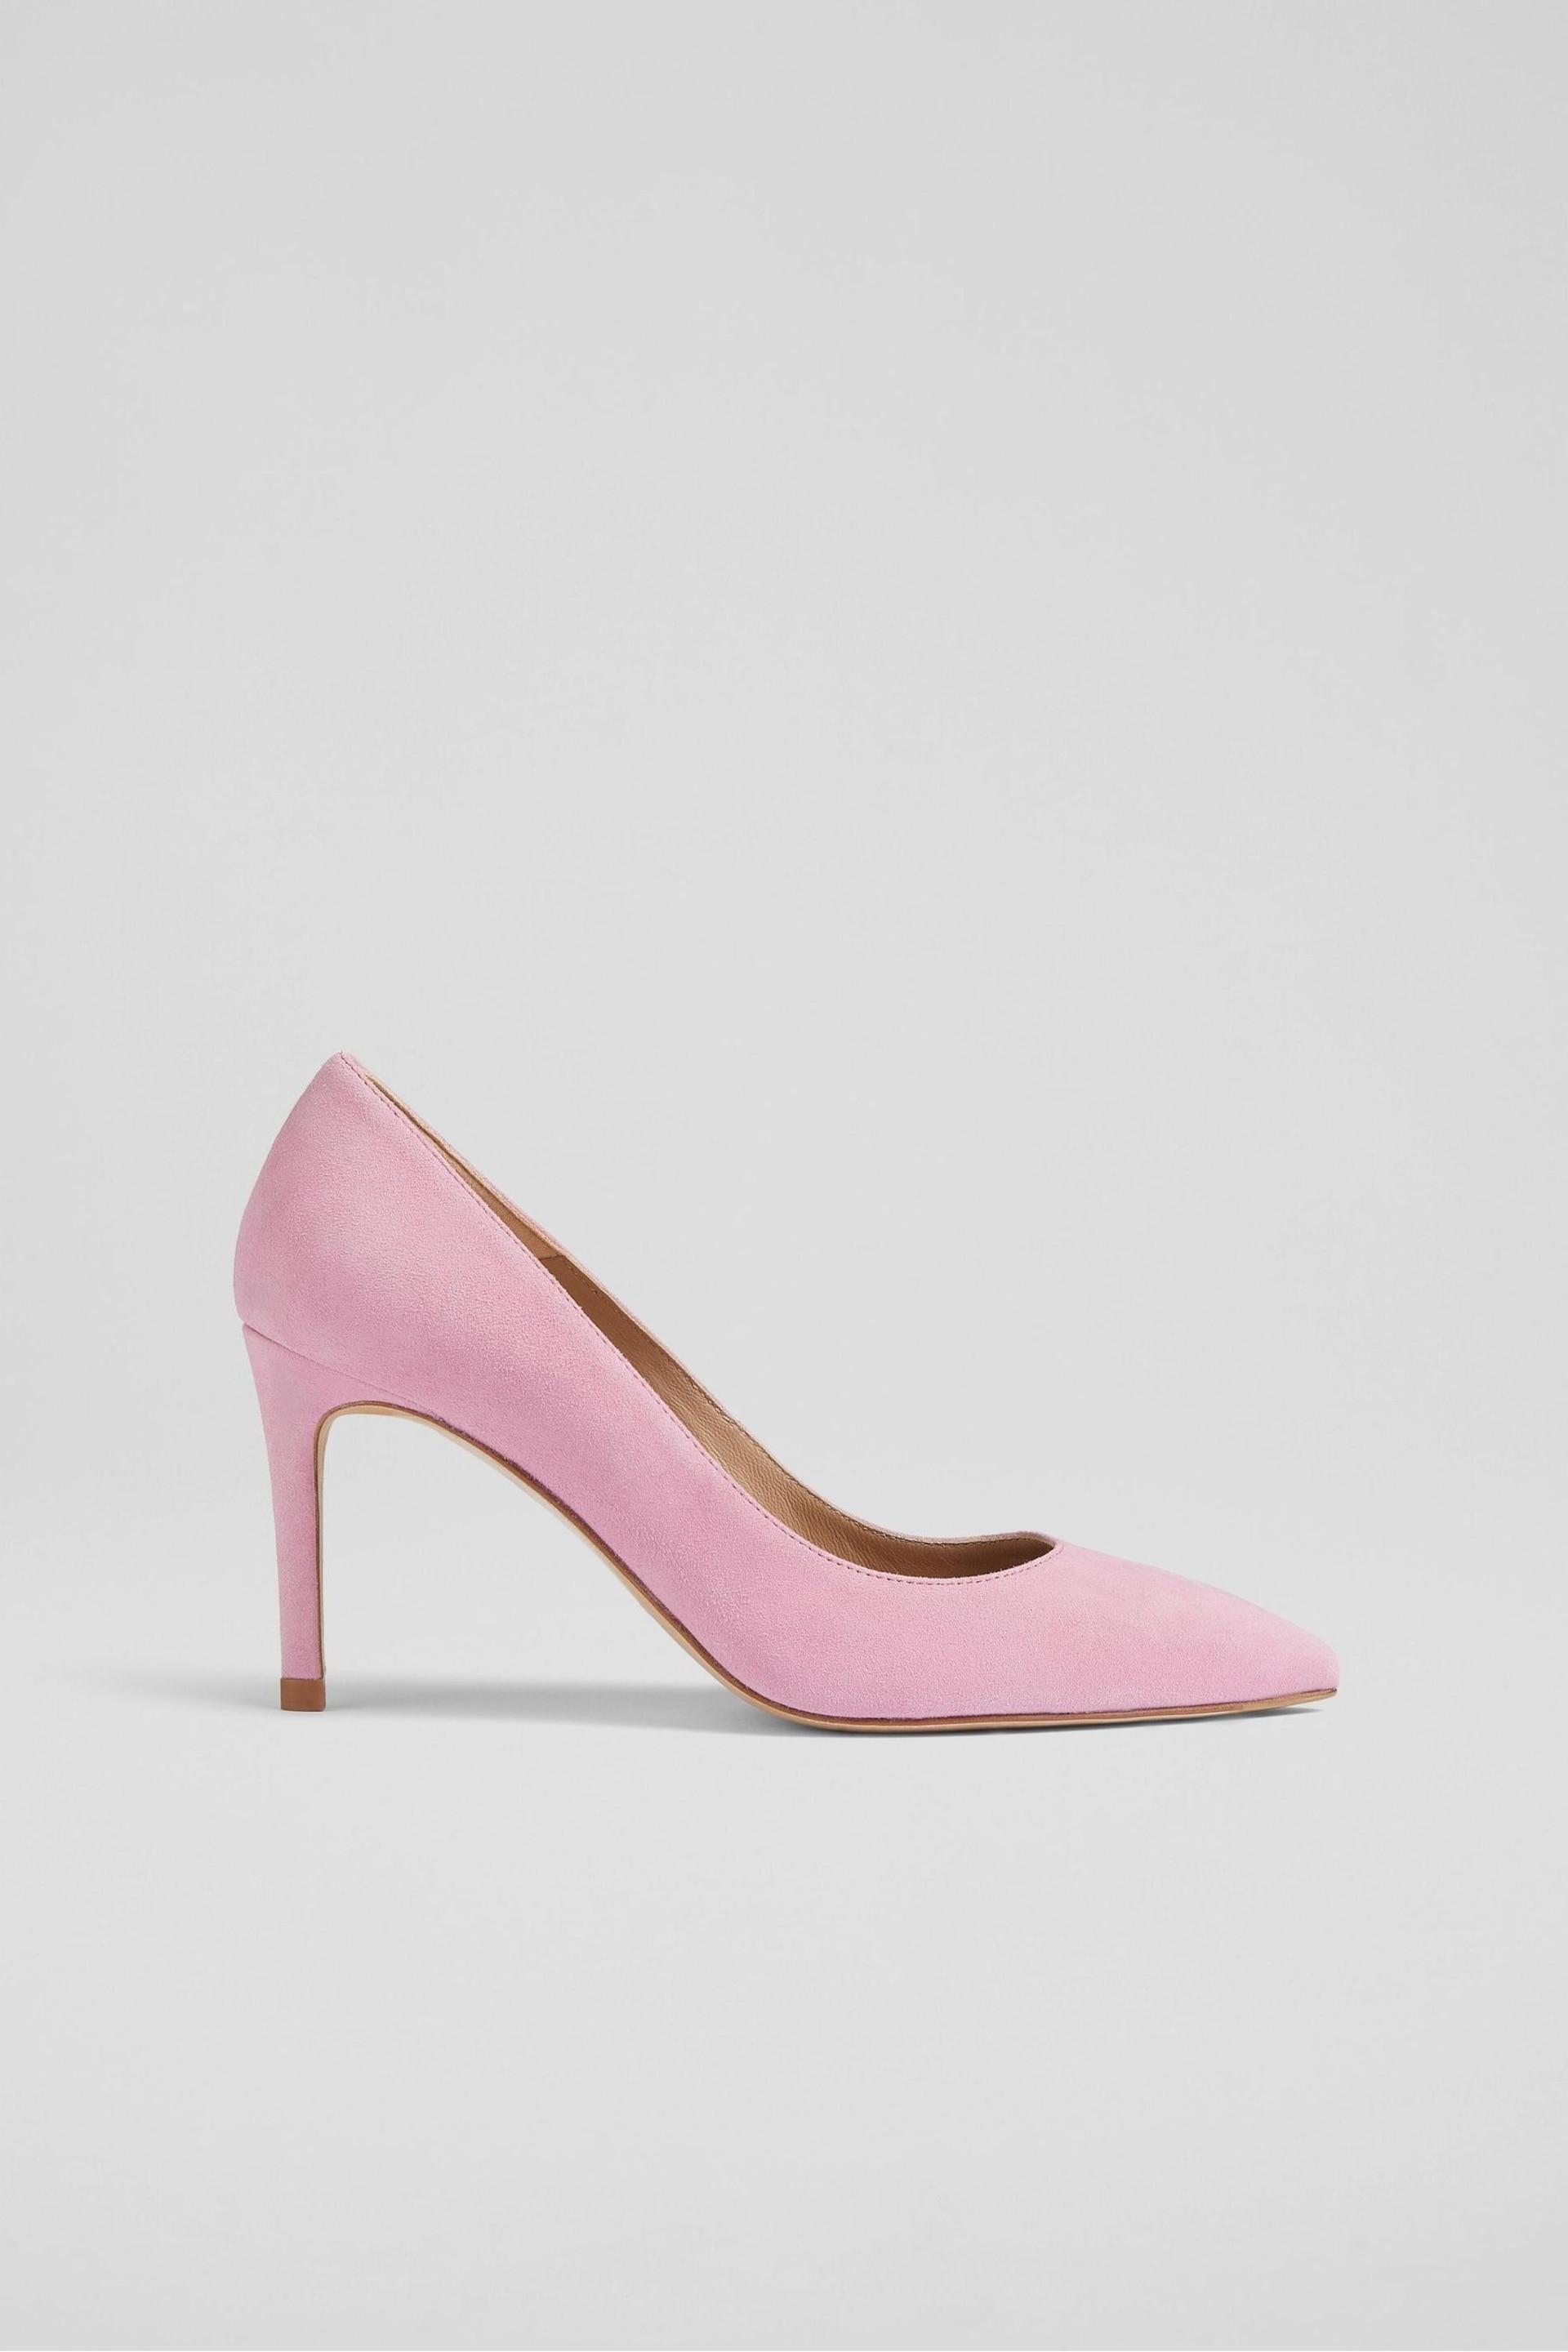 LK Bennett Floret Suede Pointed Toe Courts - Image 1 of 1